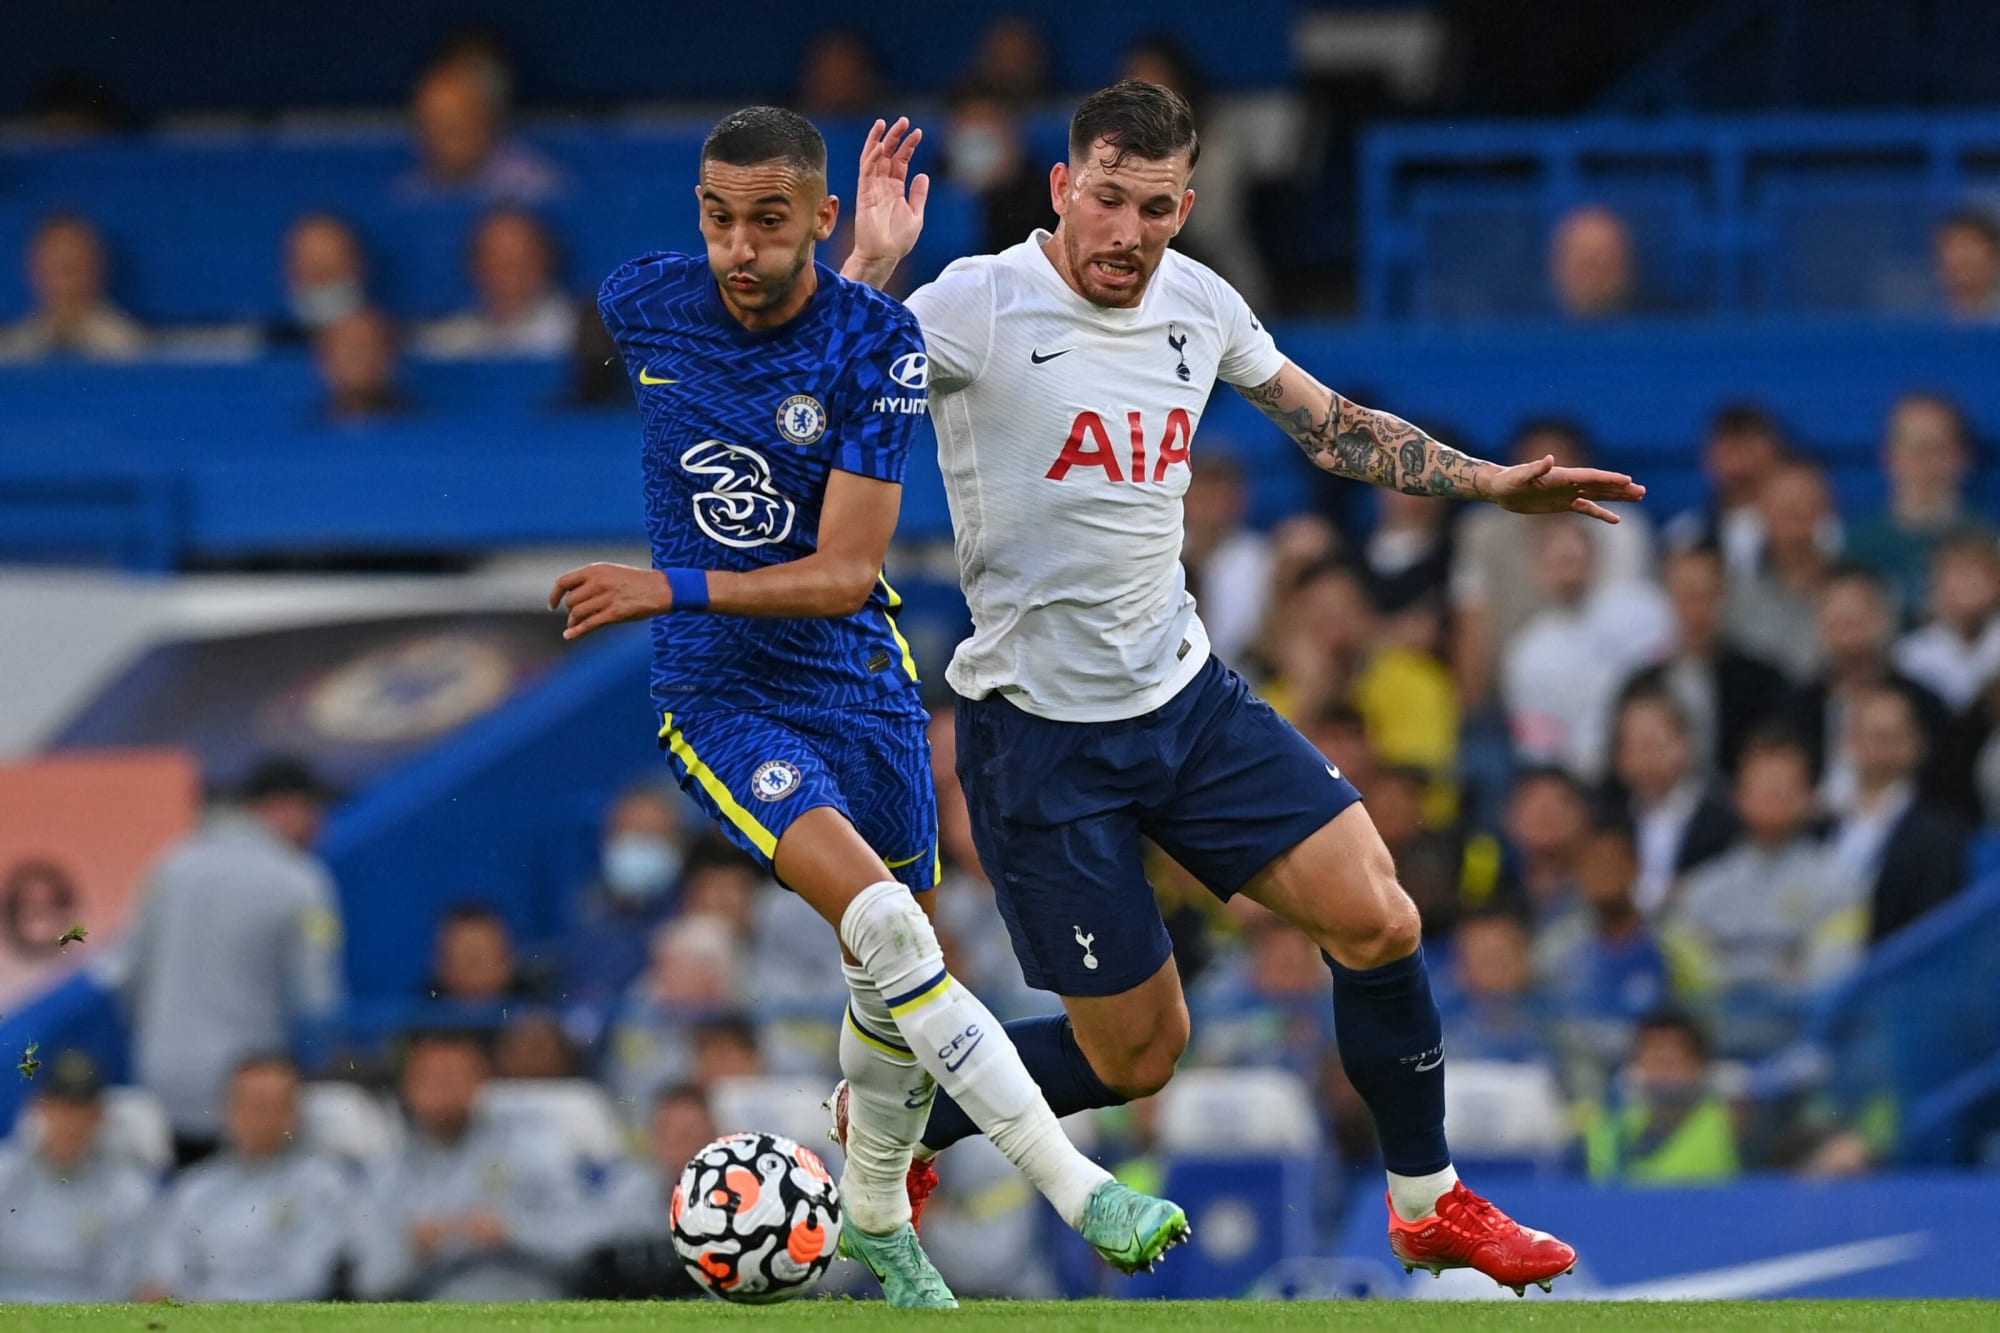  Hakim Ziyech of Chelsea and Pierre-Emile Hojbjerg of Tottenham Hotspur compete for the ball during the Premier League match between Chelsea and Tottenham Hotspur at Stamford Bridge.